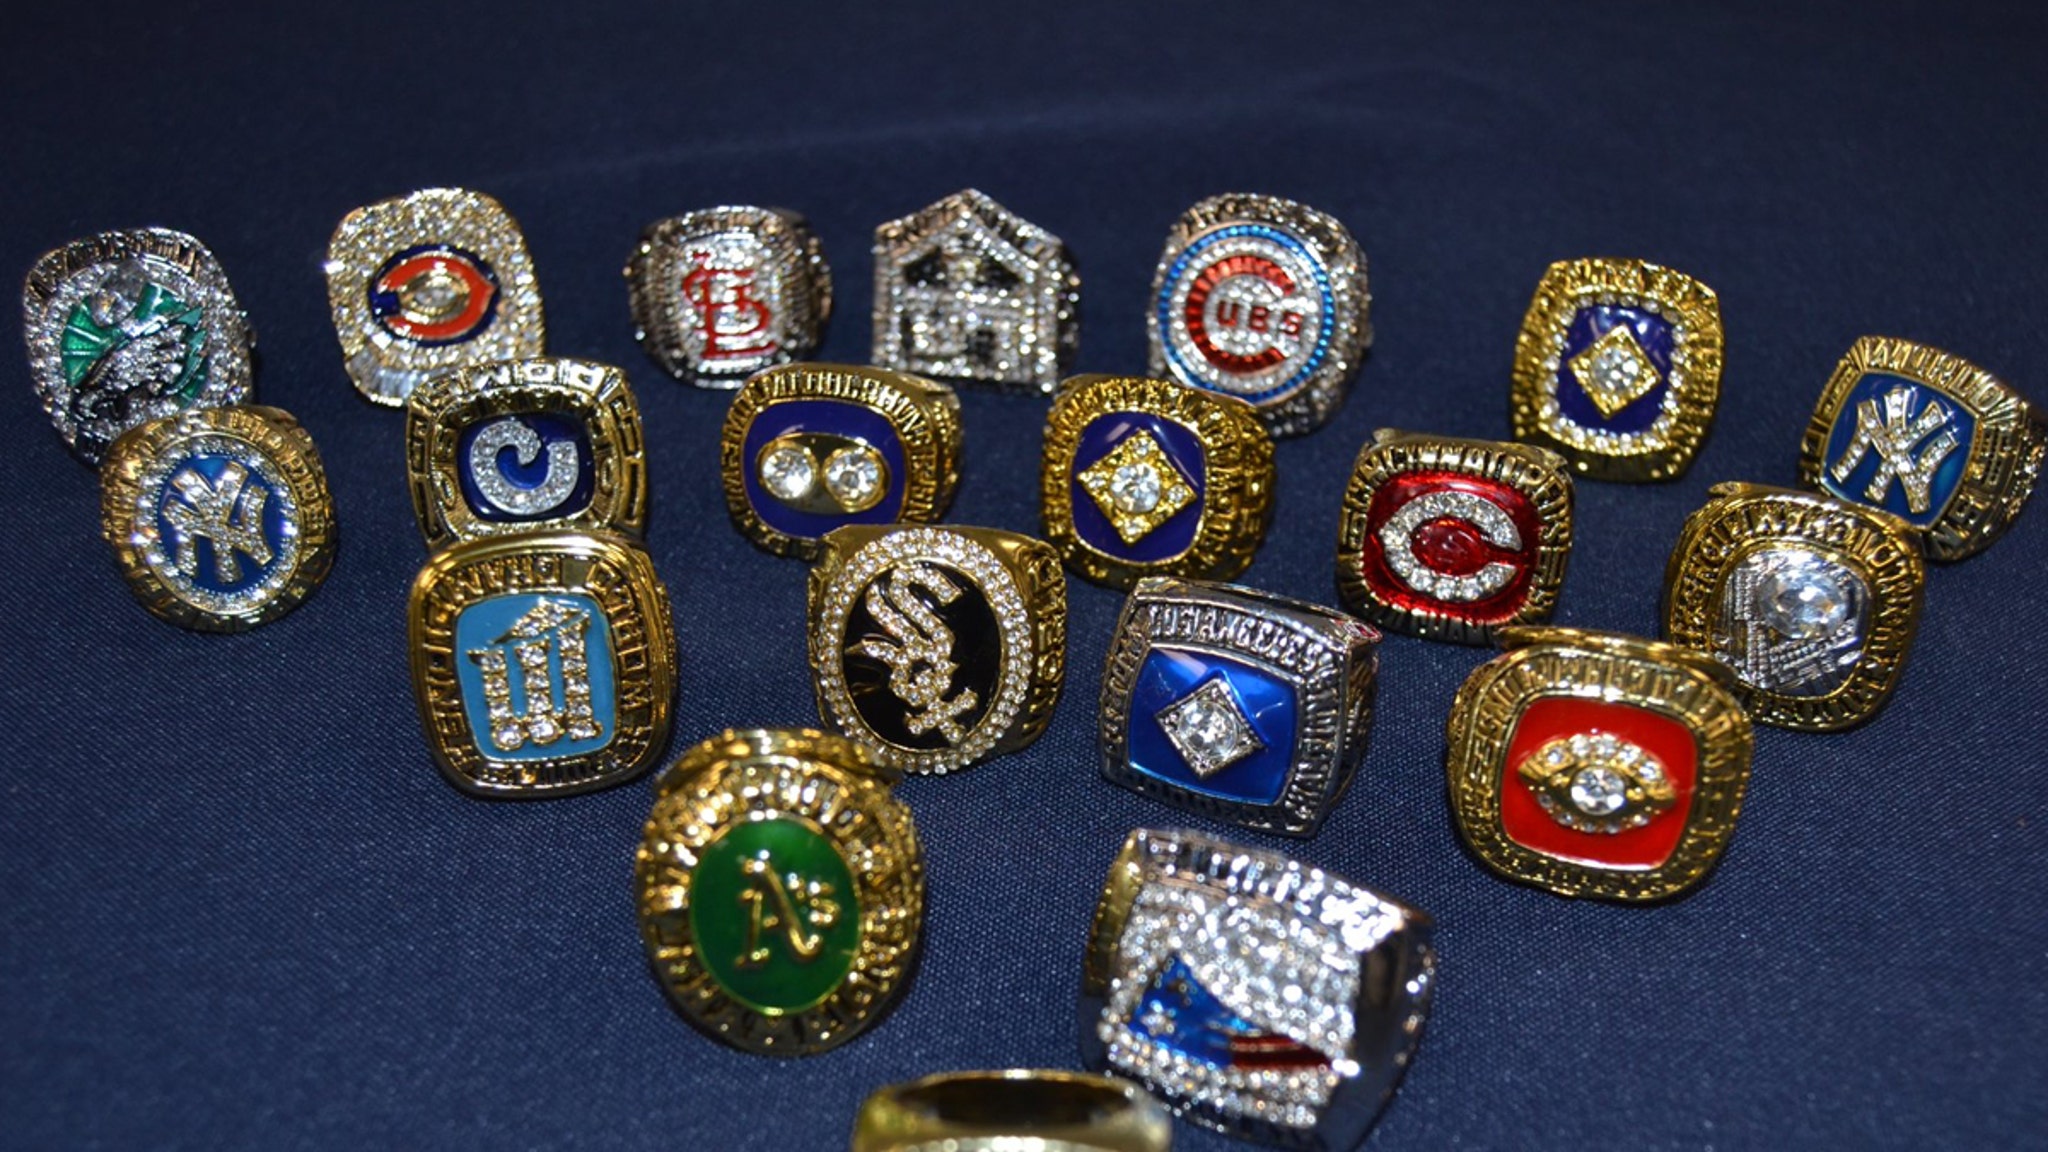 $12 MILLION In Bogus Super Bowl, World Series Rings Seized In